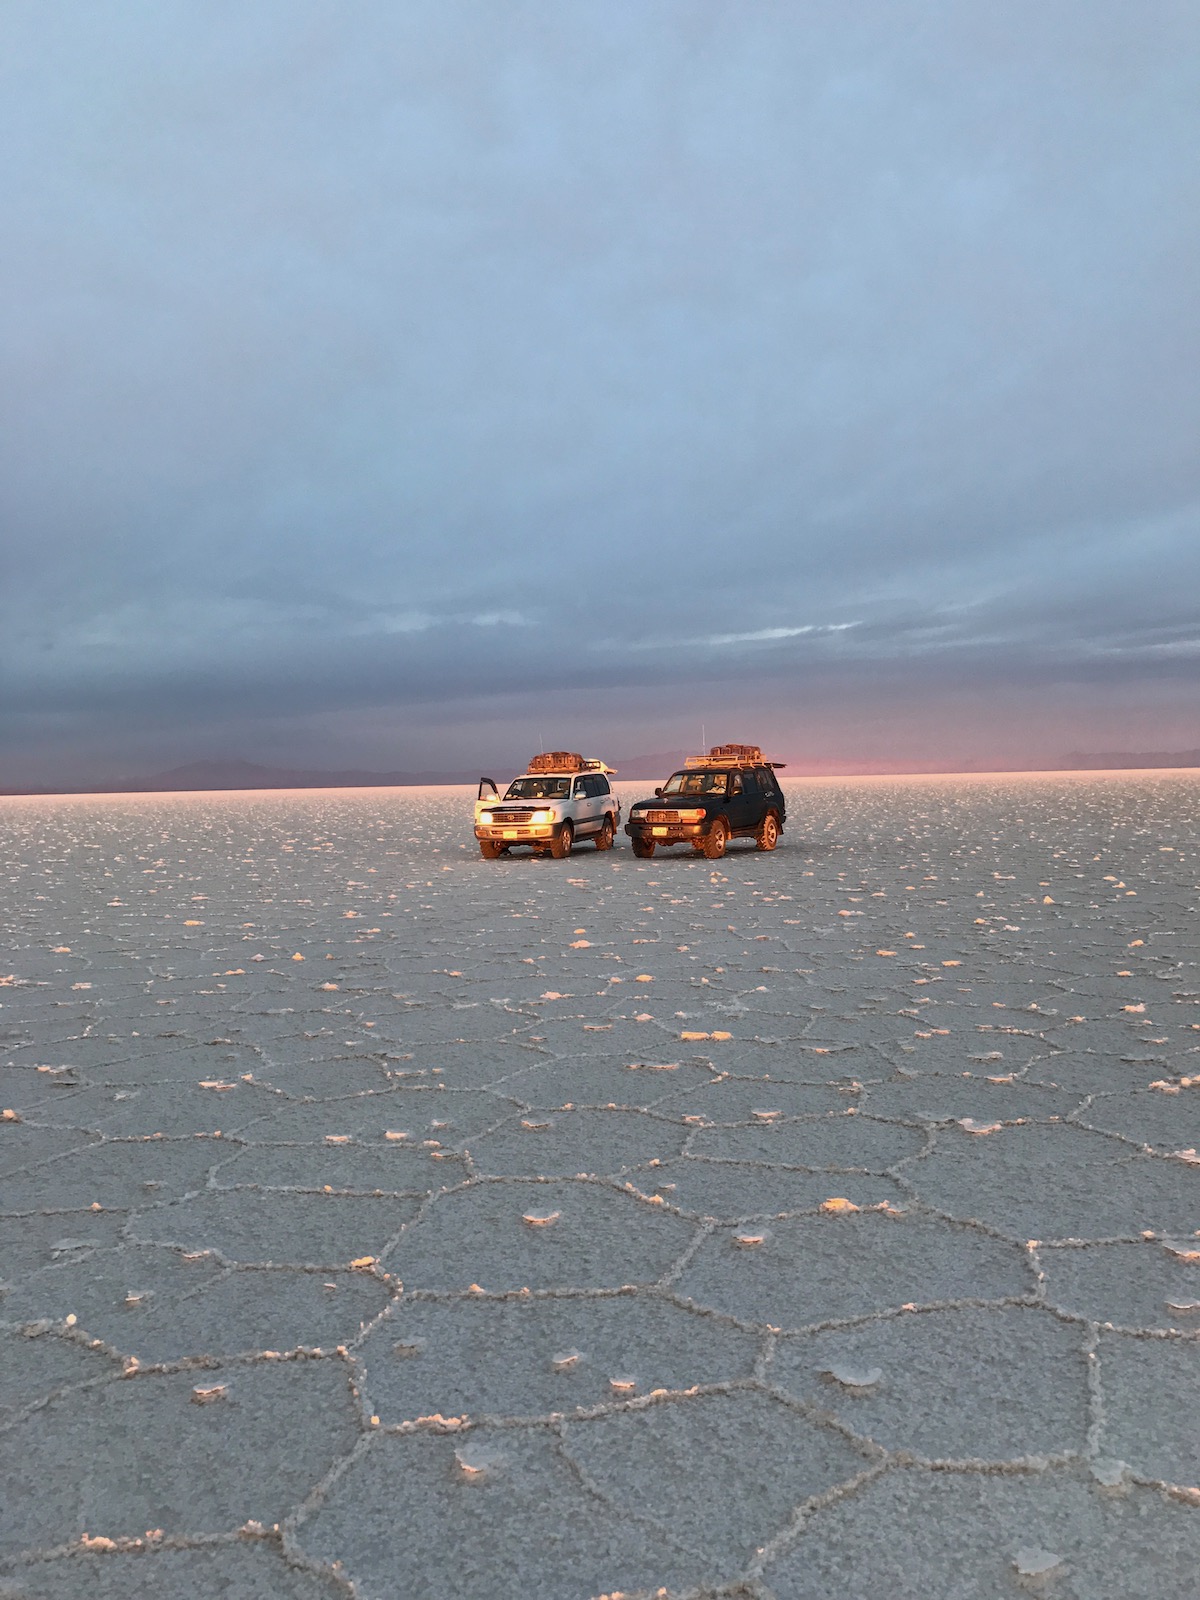 Two jeeps in the middle of the desert in Salar de Uyuni, Bolivia.